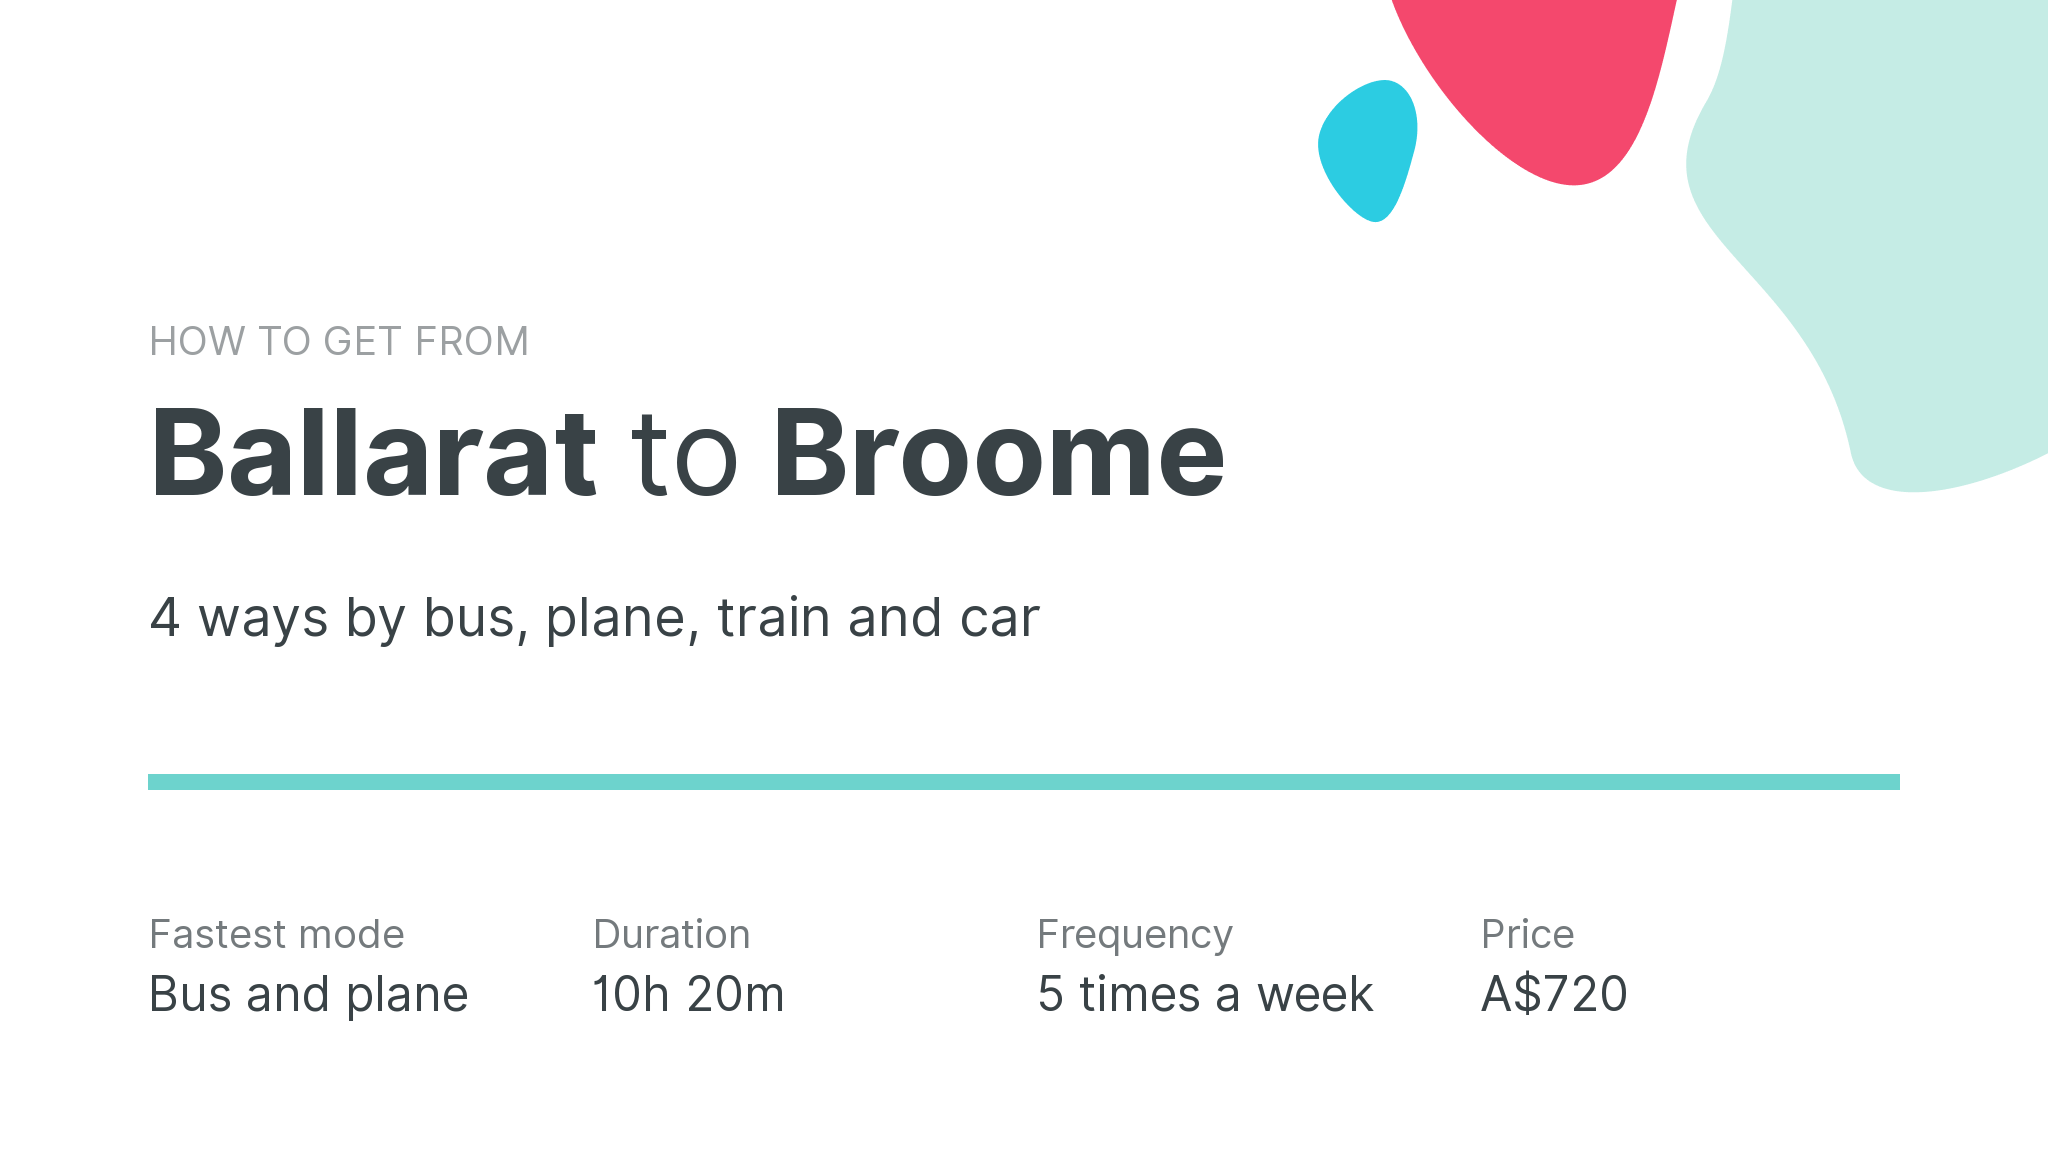 How do I get from Ballarat to Broome